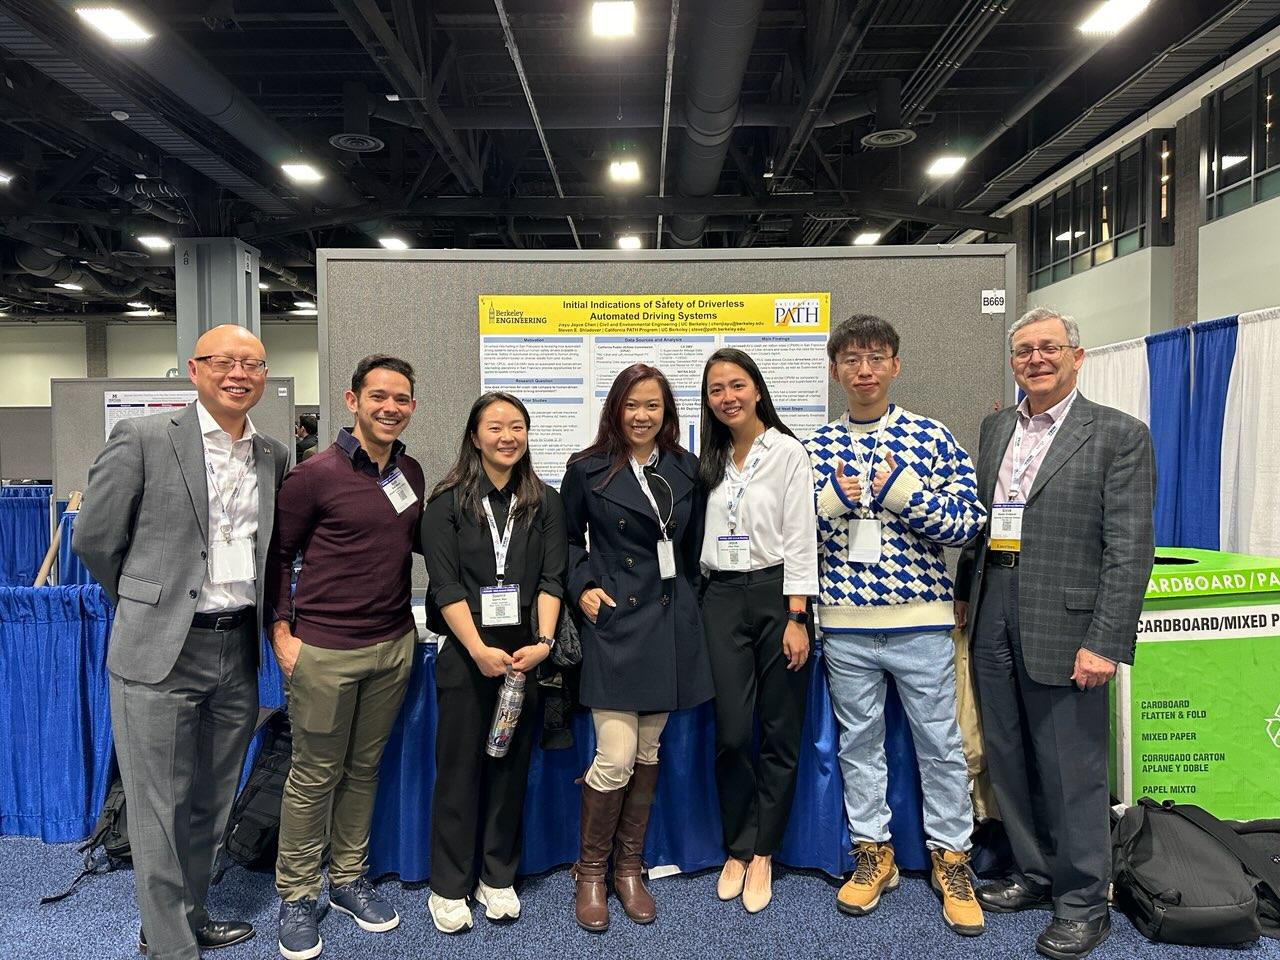 TE PhD student Joyce Jiayu Chen, advisors and friends at her poster Initial Indications of Safety of Driverless Automated Driving Systems at Transportation Research Board Annual Meeting 